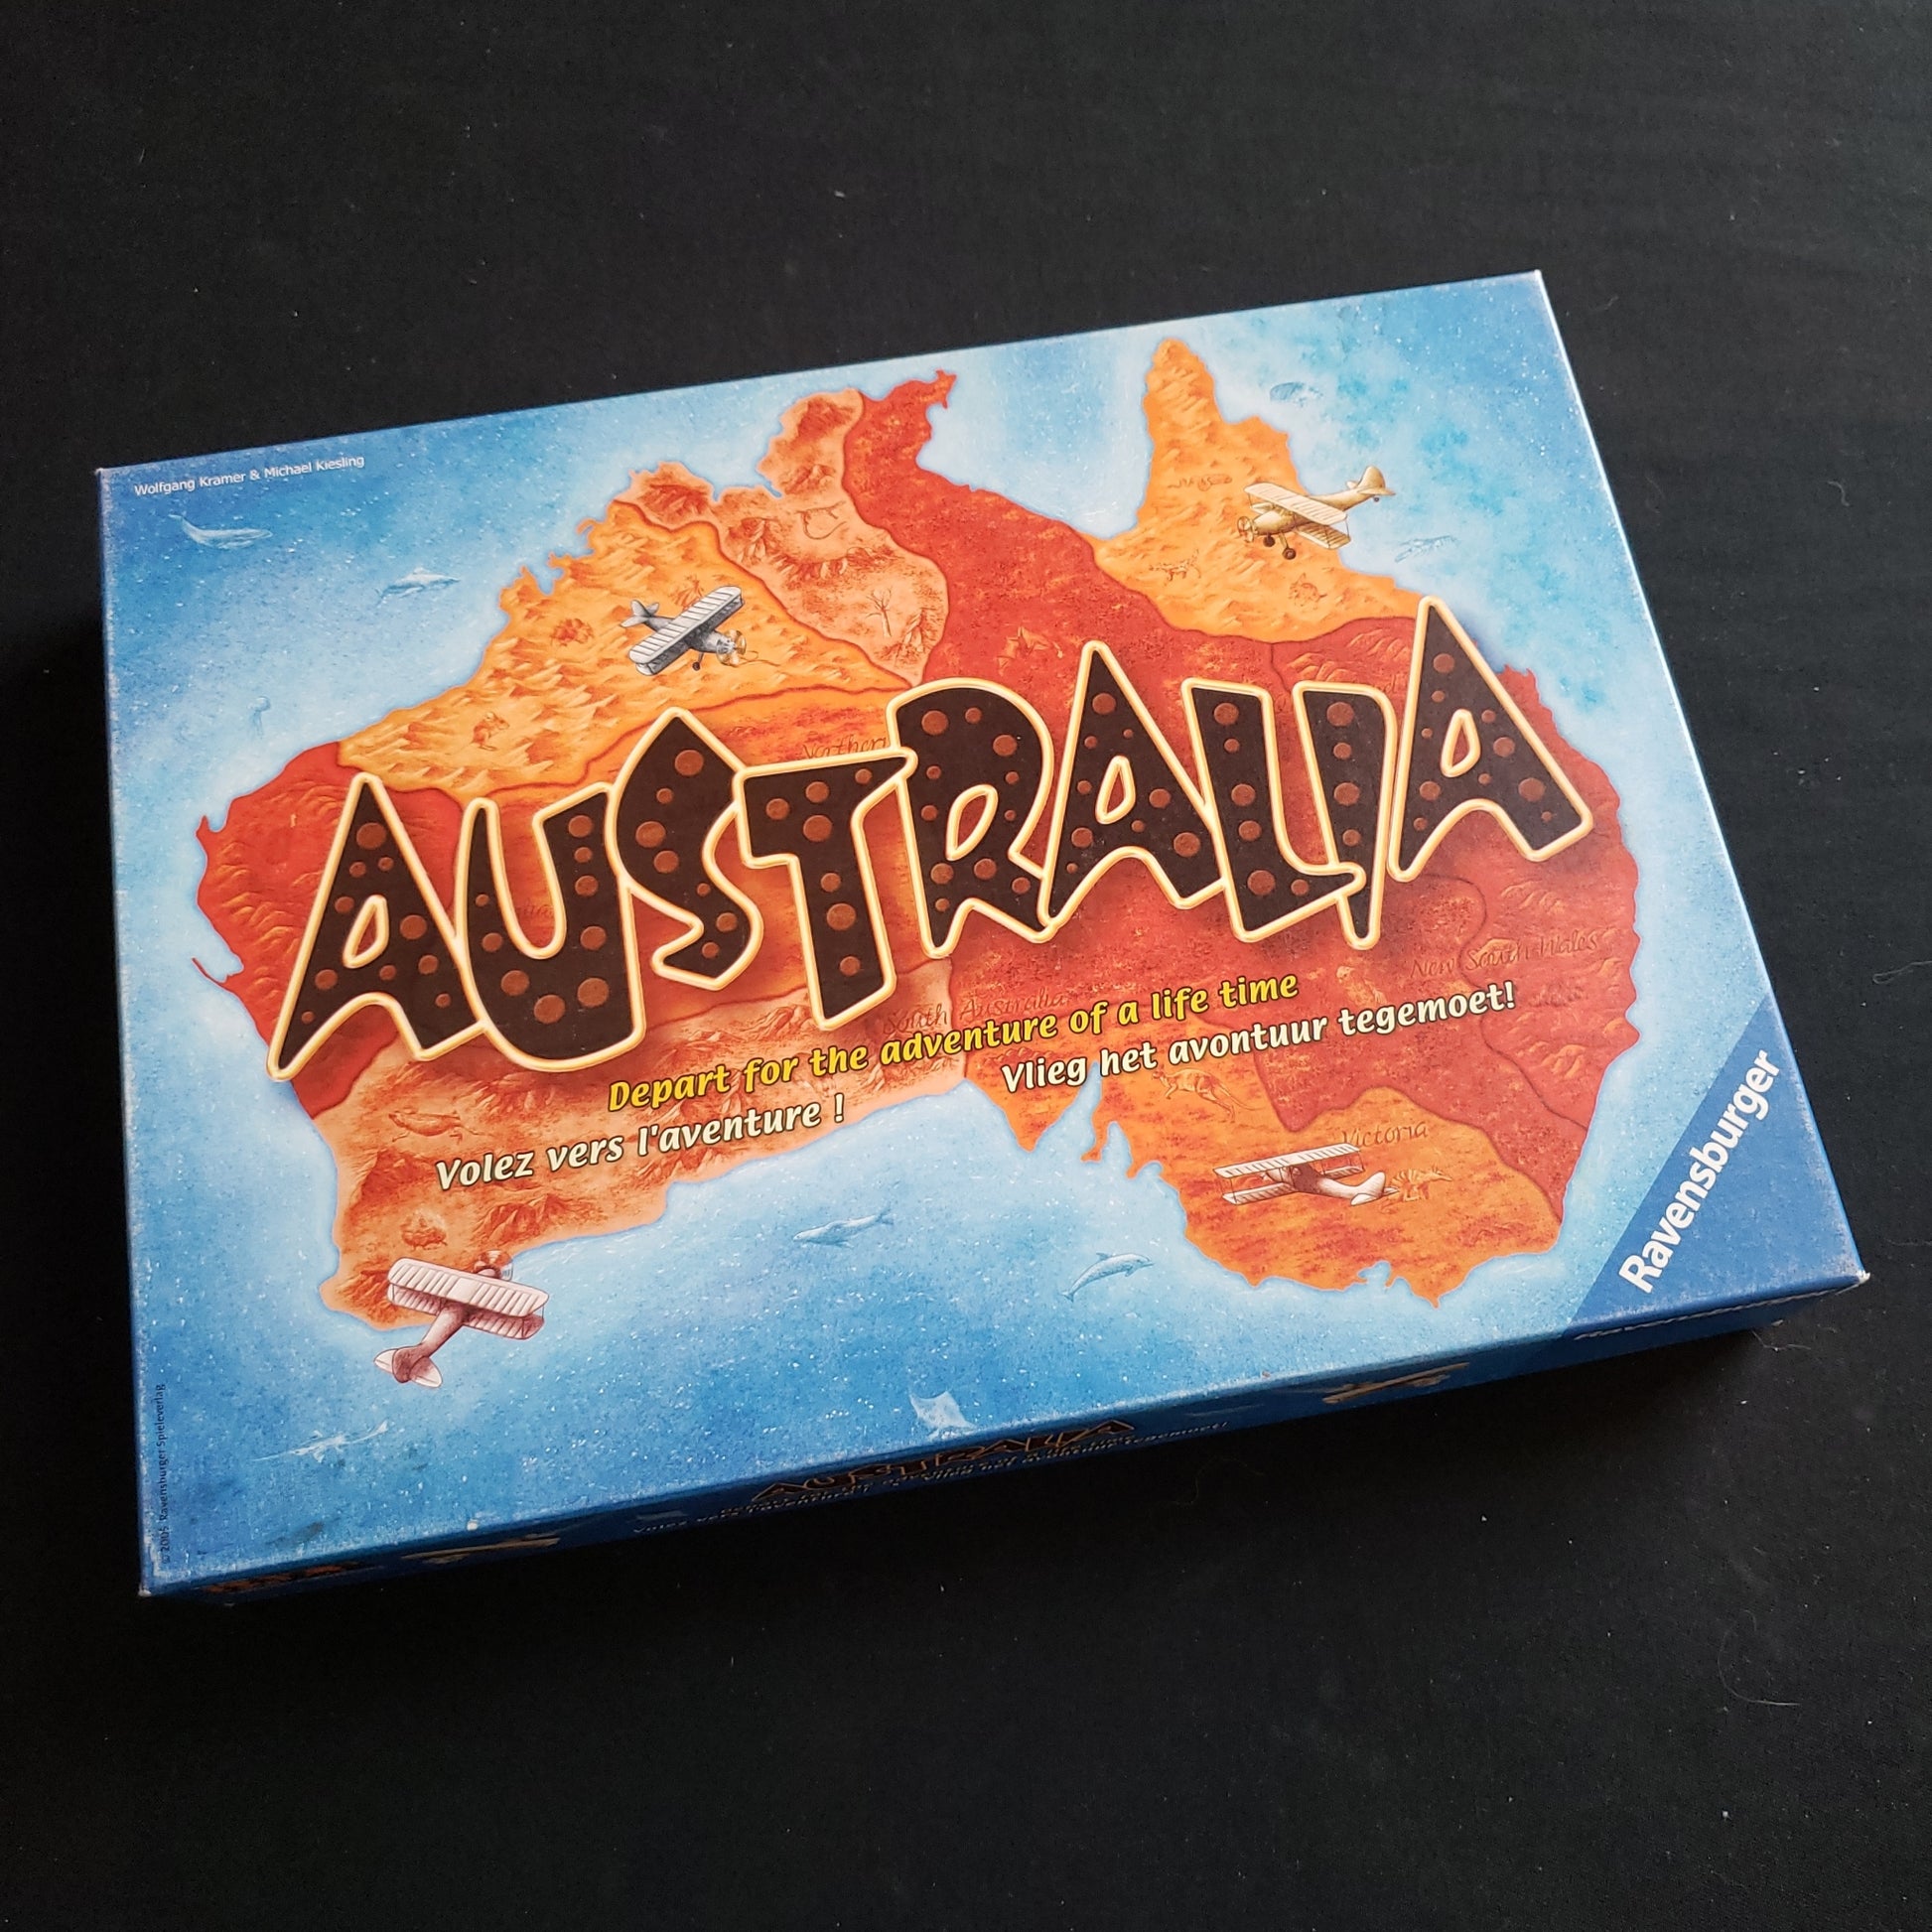 Image shows the front cover of the box of the Australia board game